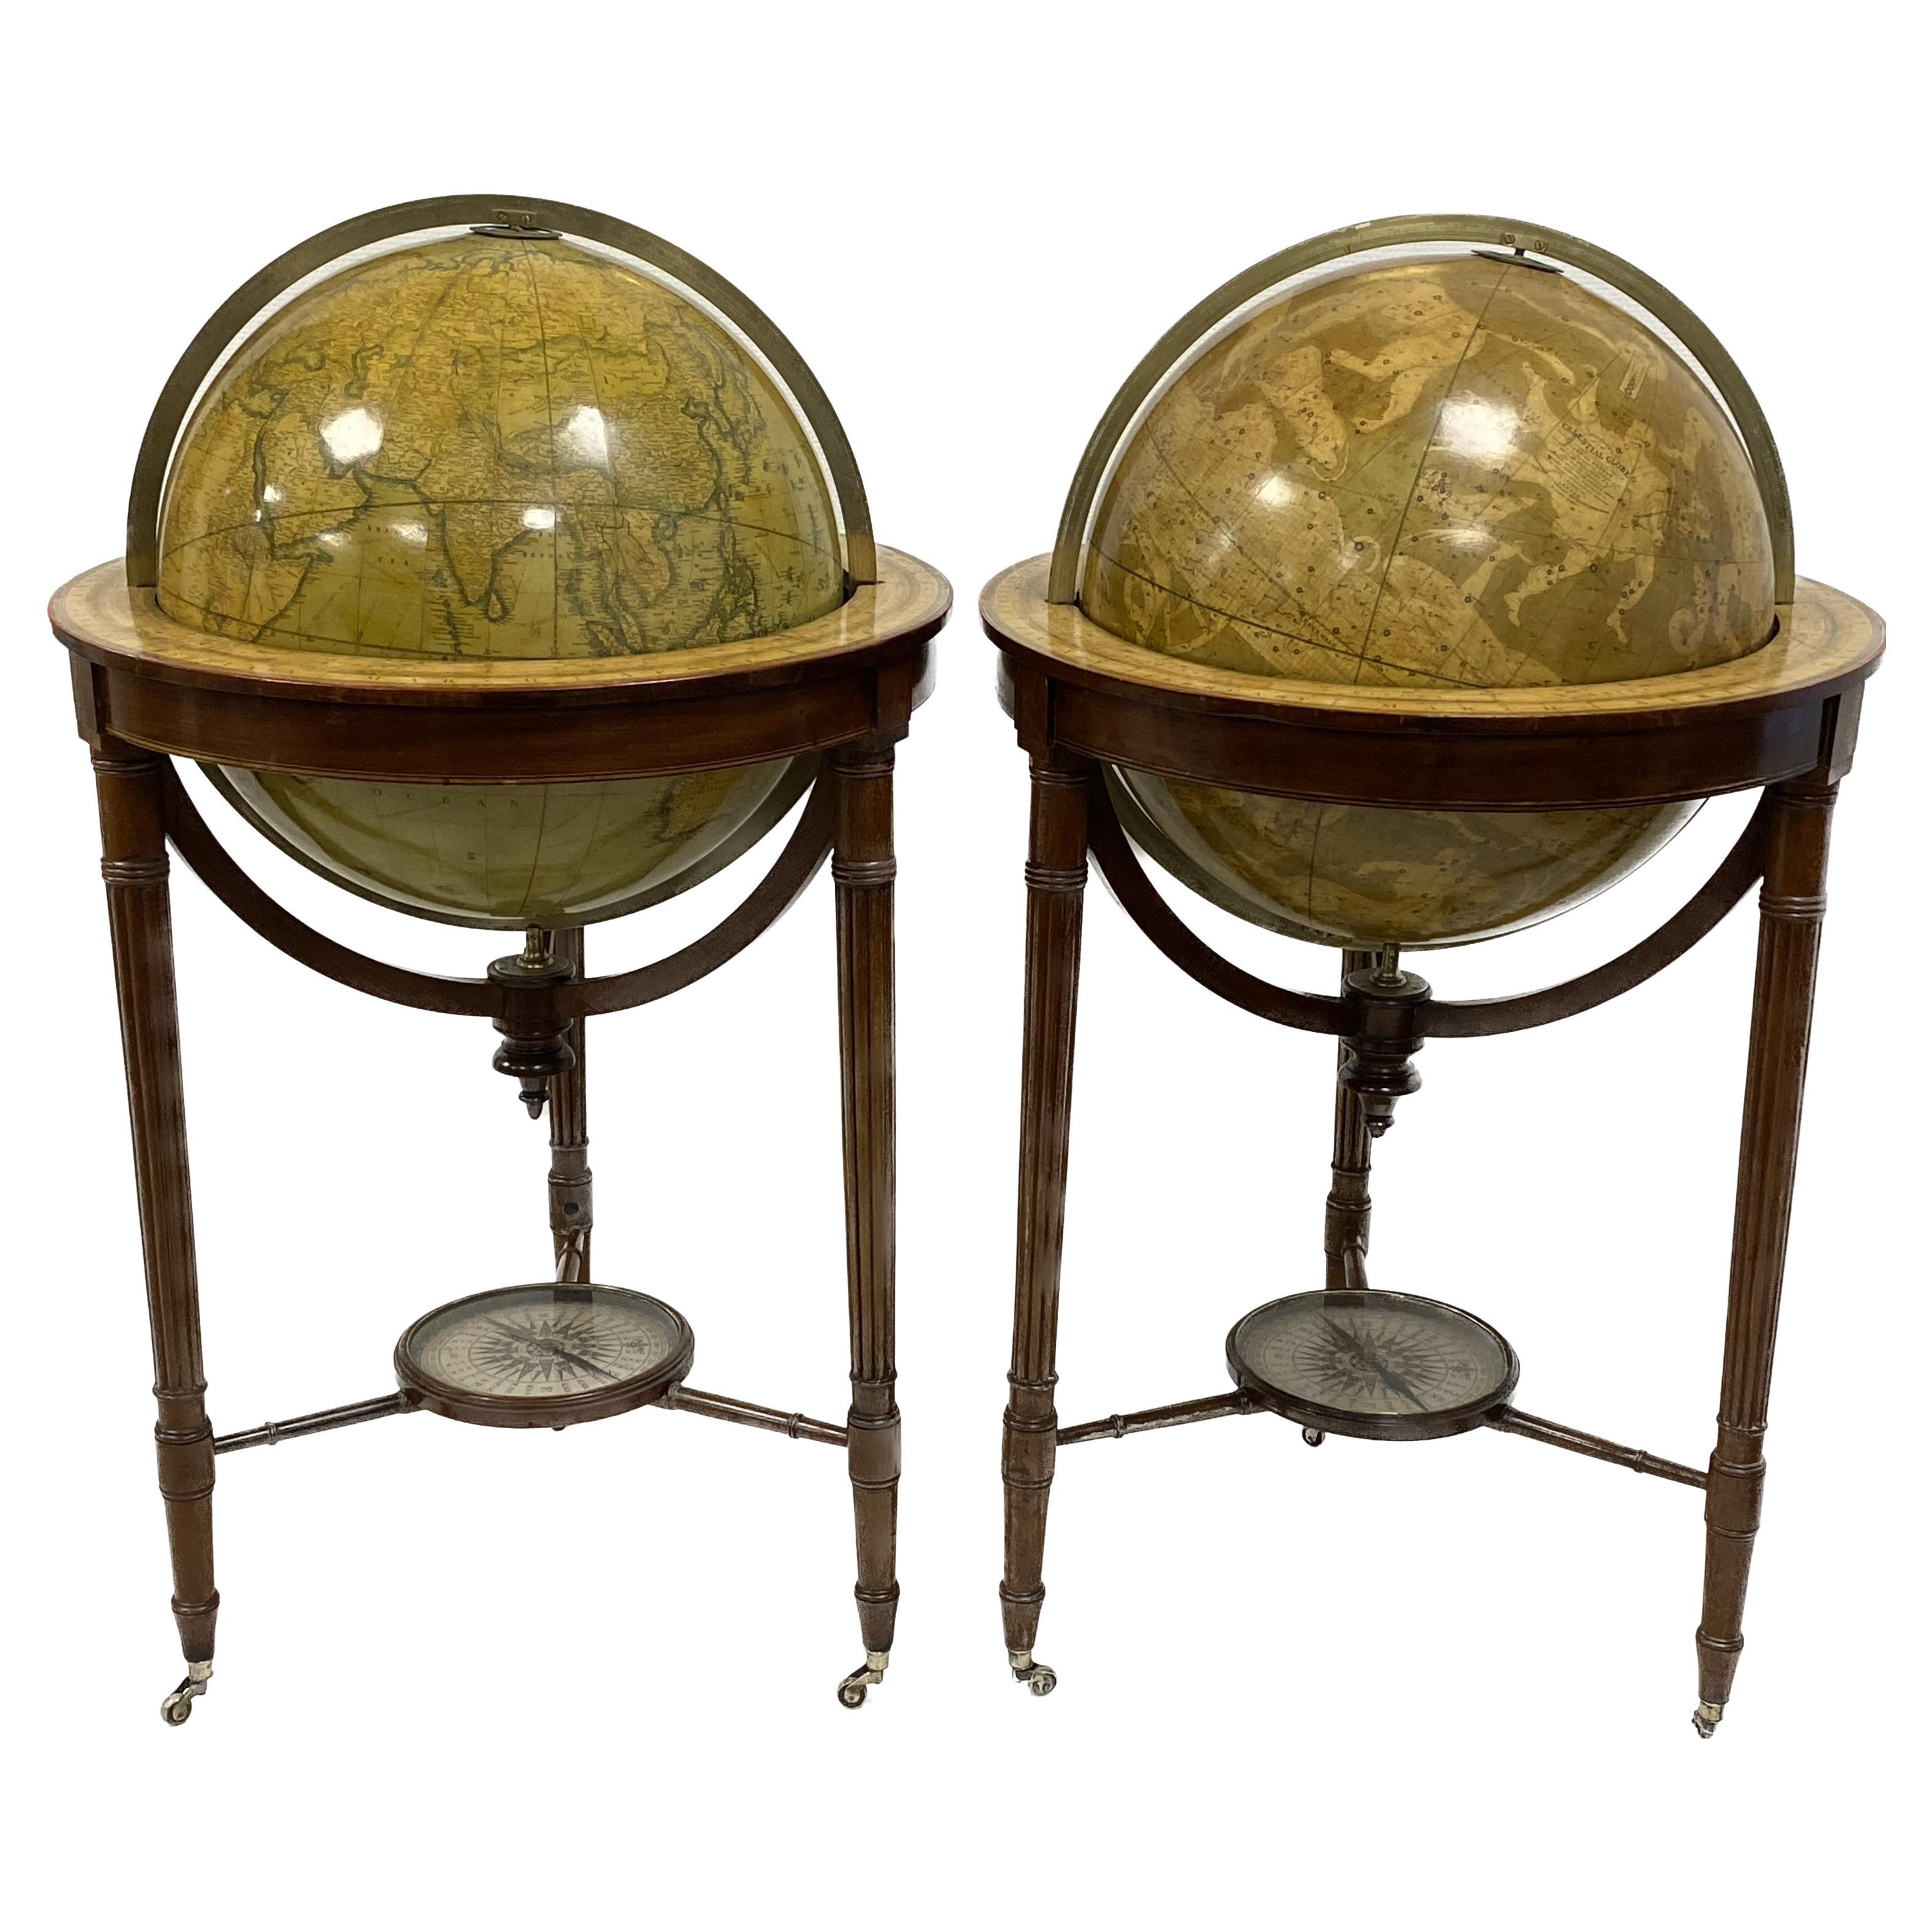 A huge pair of 21 inches Cruchley Library Globes